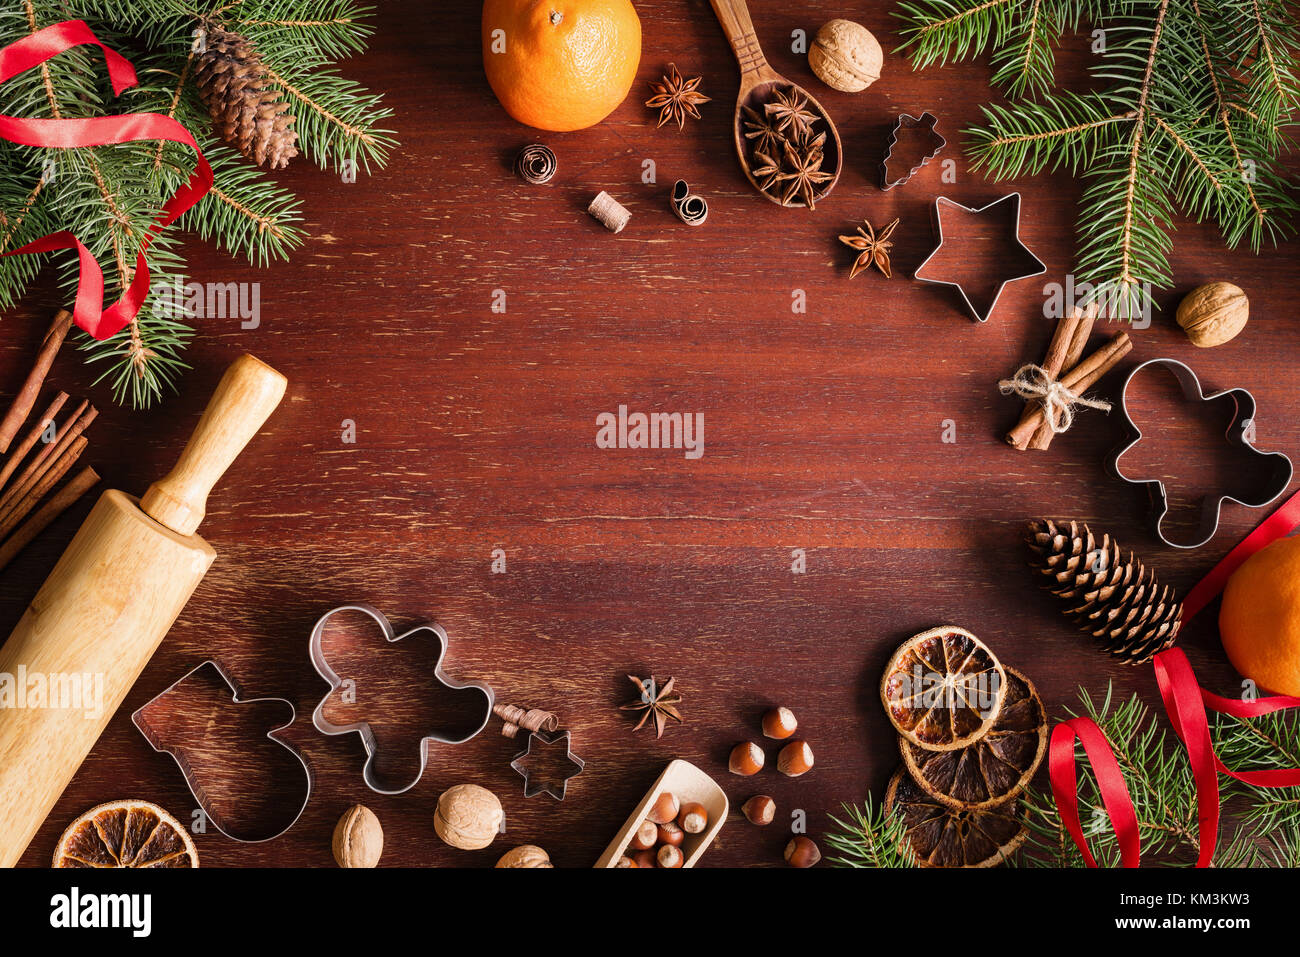 Christmas or New Year frame border with gingerbread cookies, nuts, spices, fir tree branches and cookie cutters on wooden table. Top view with copy sp Stock Photo